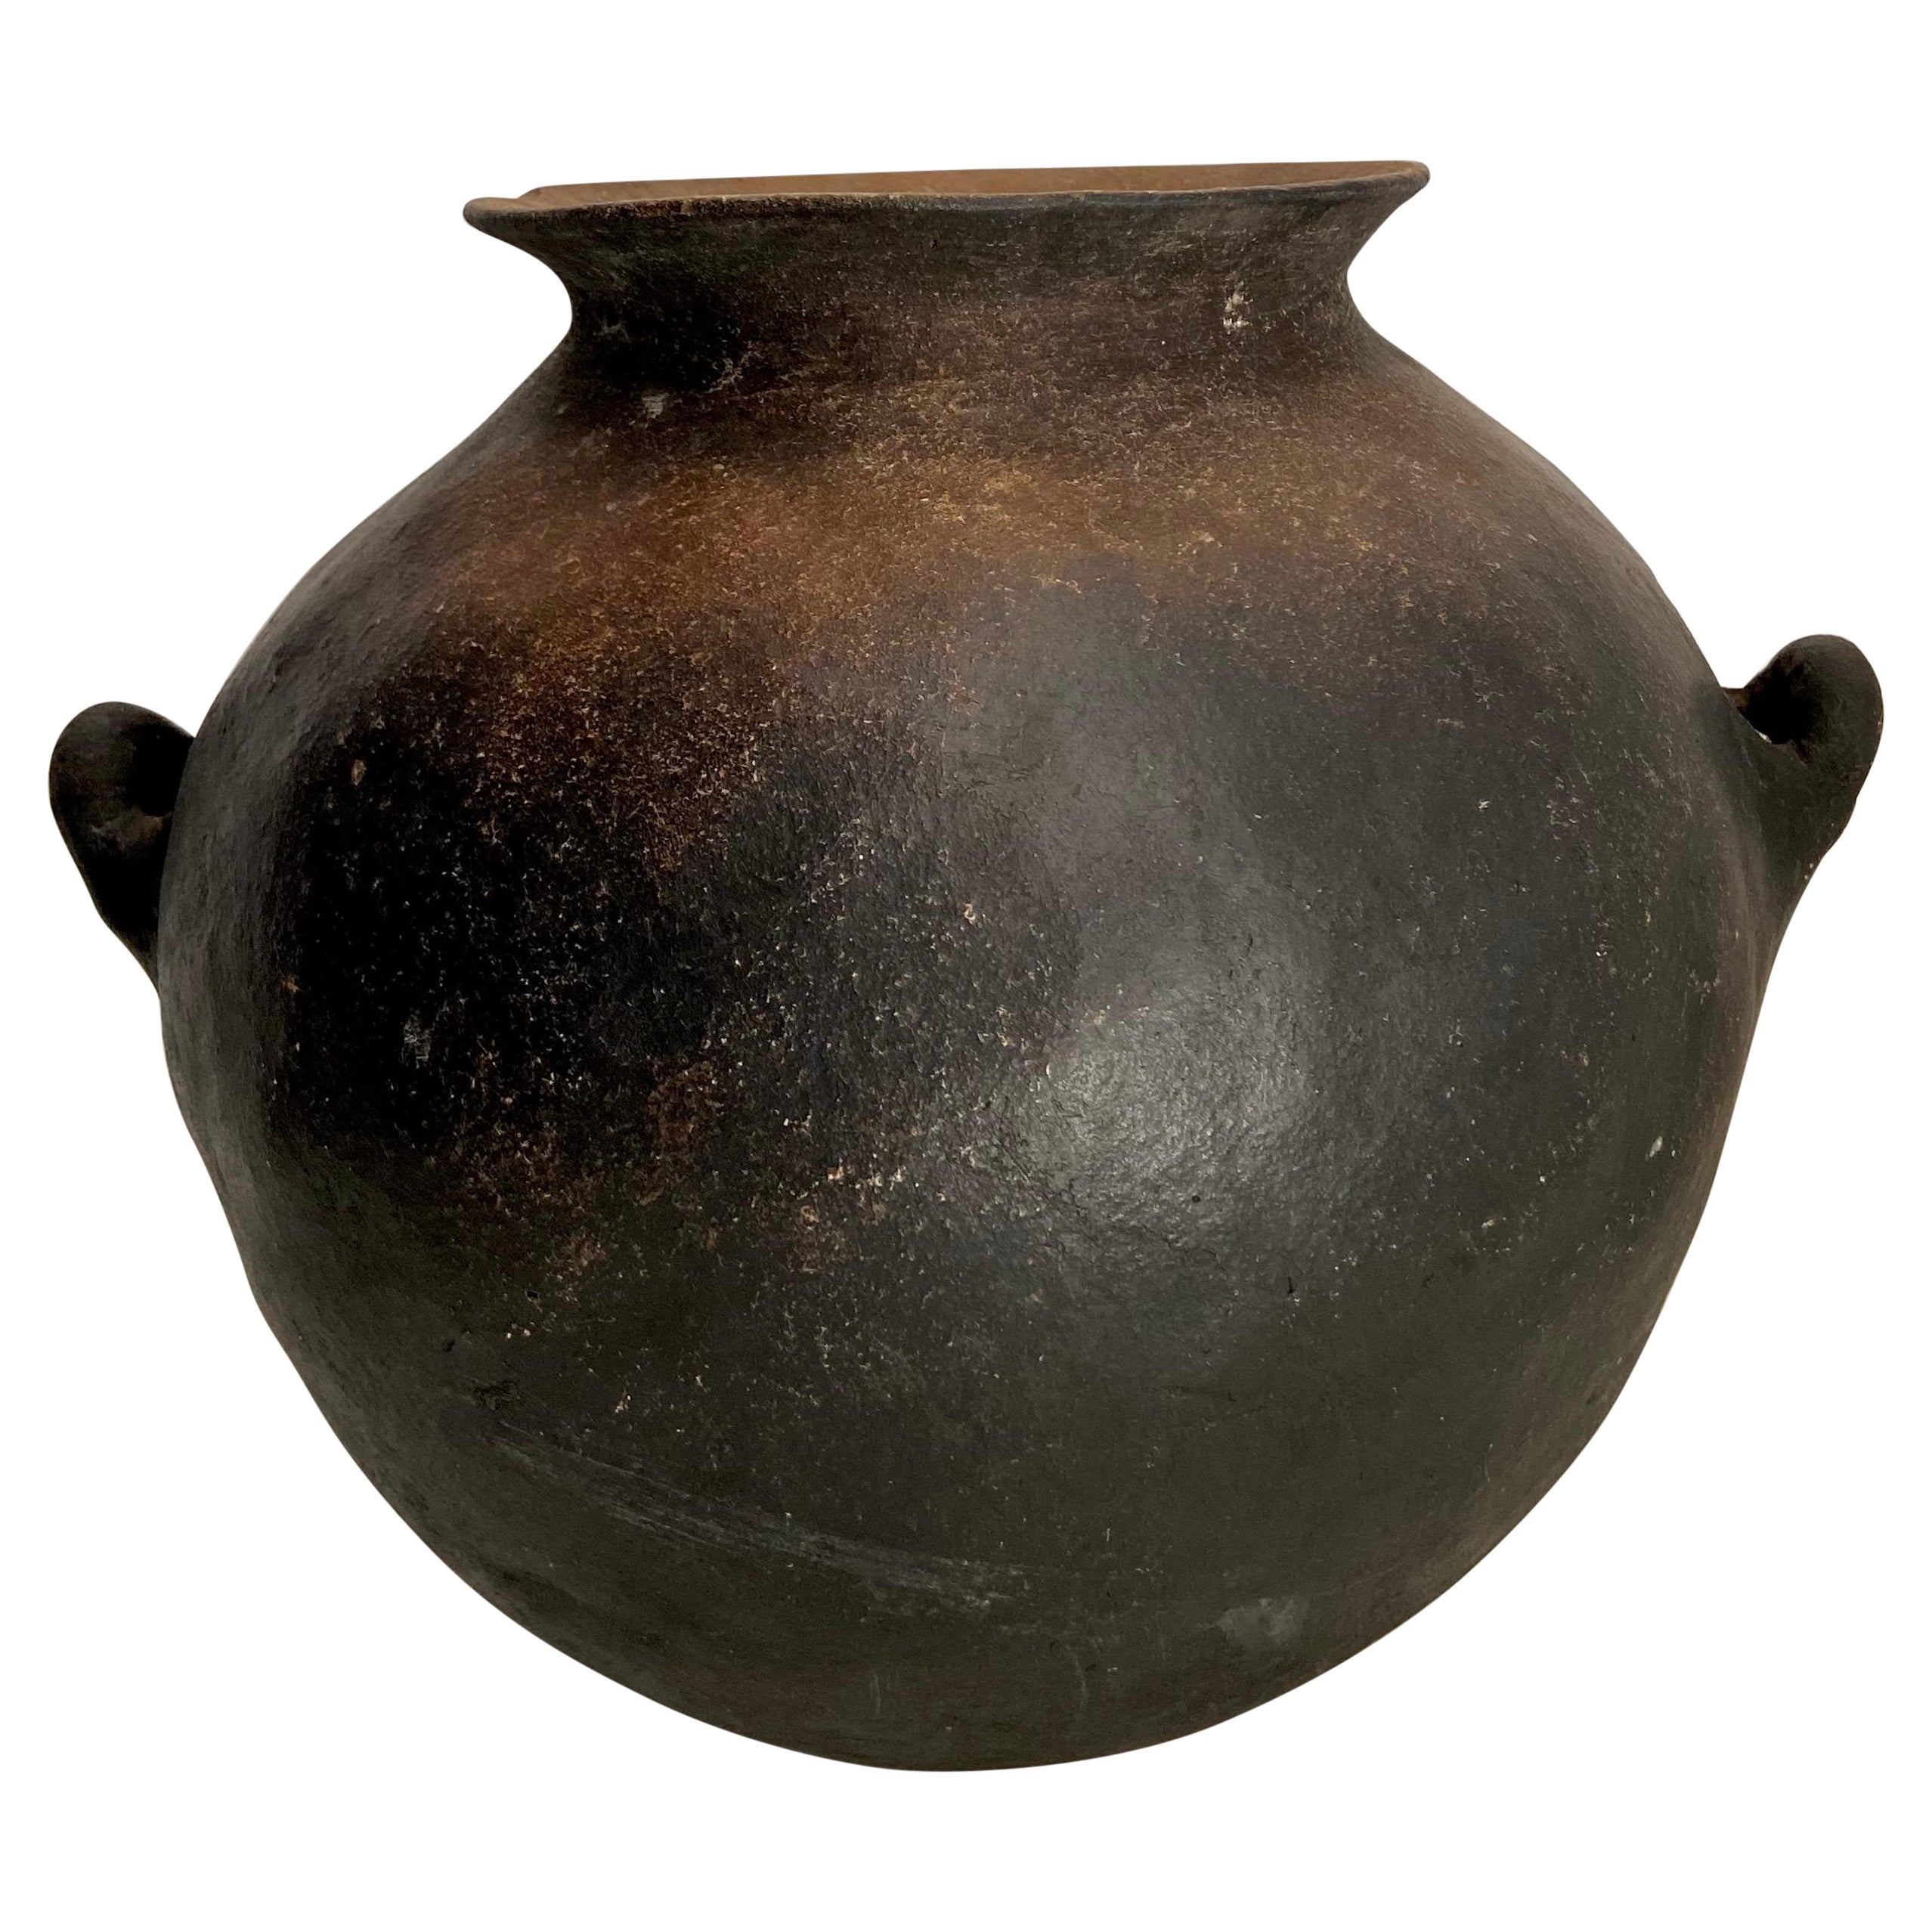 Mid 20th Century Terracotta Water Pot from Central Mexico